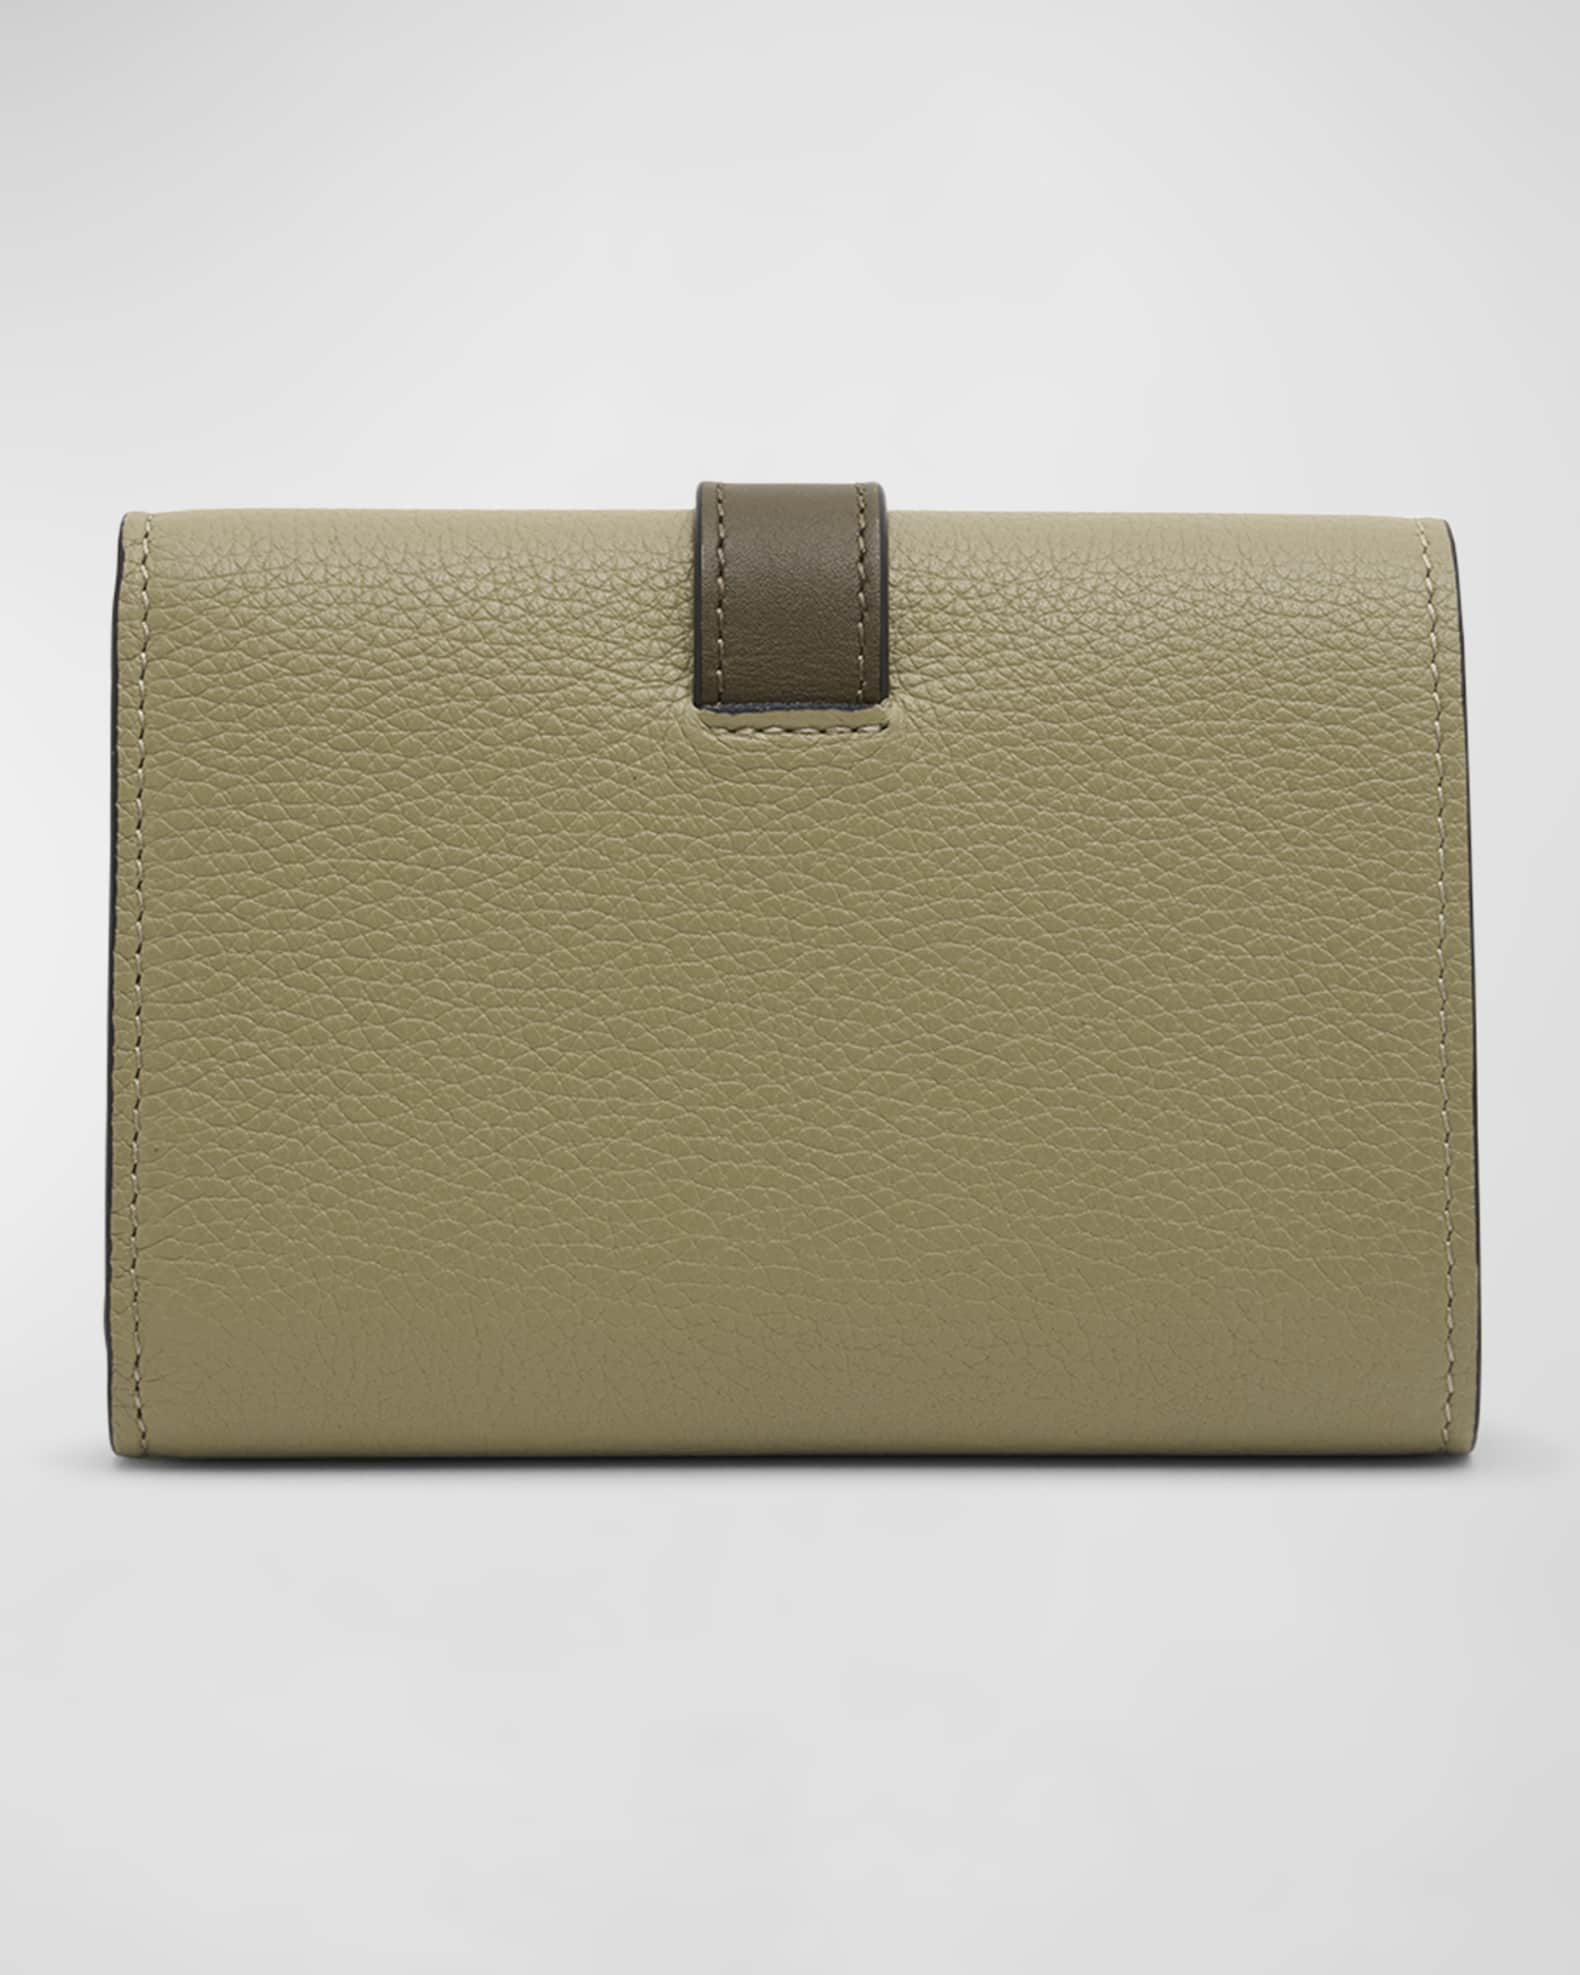 Loewe Trifold Wallet in Grained Leather | Neiman Marcus